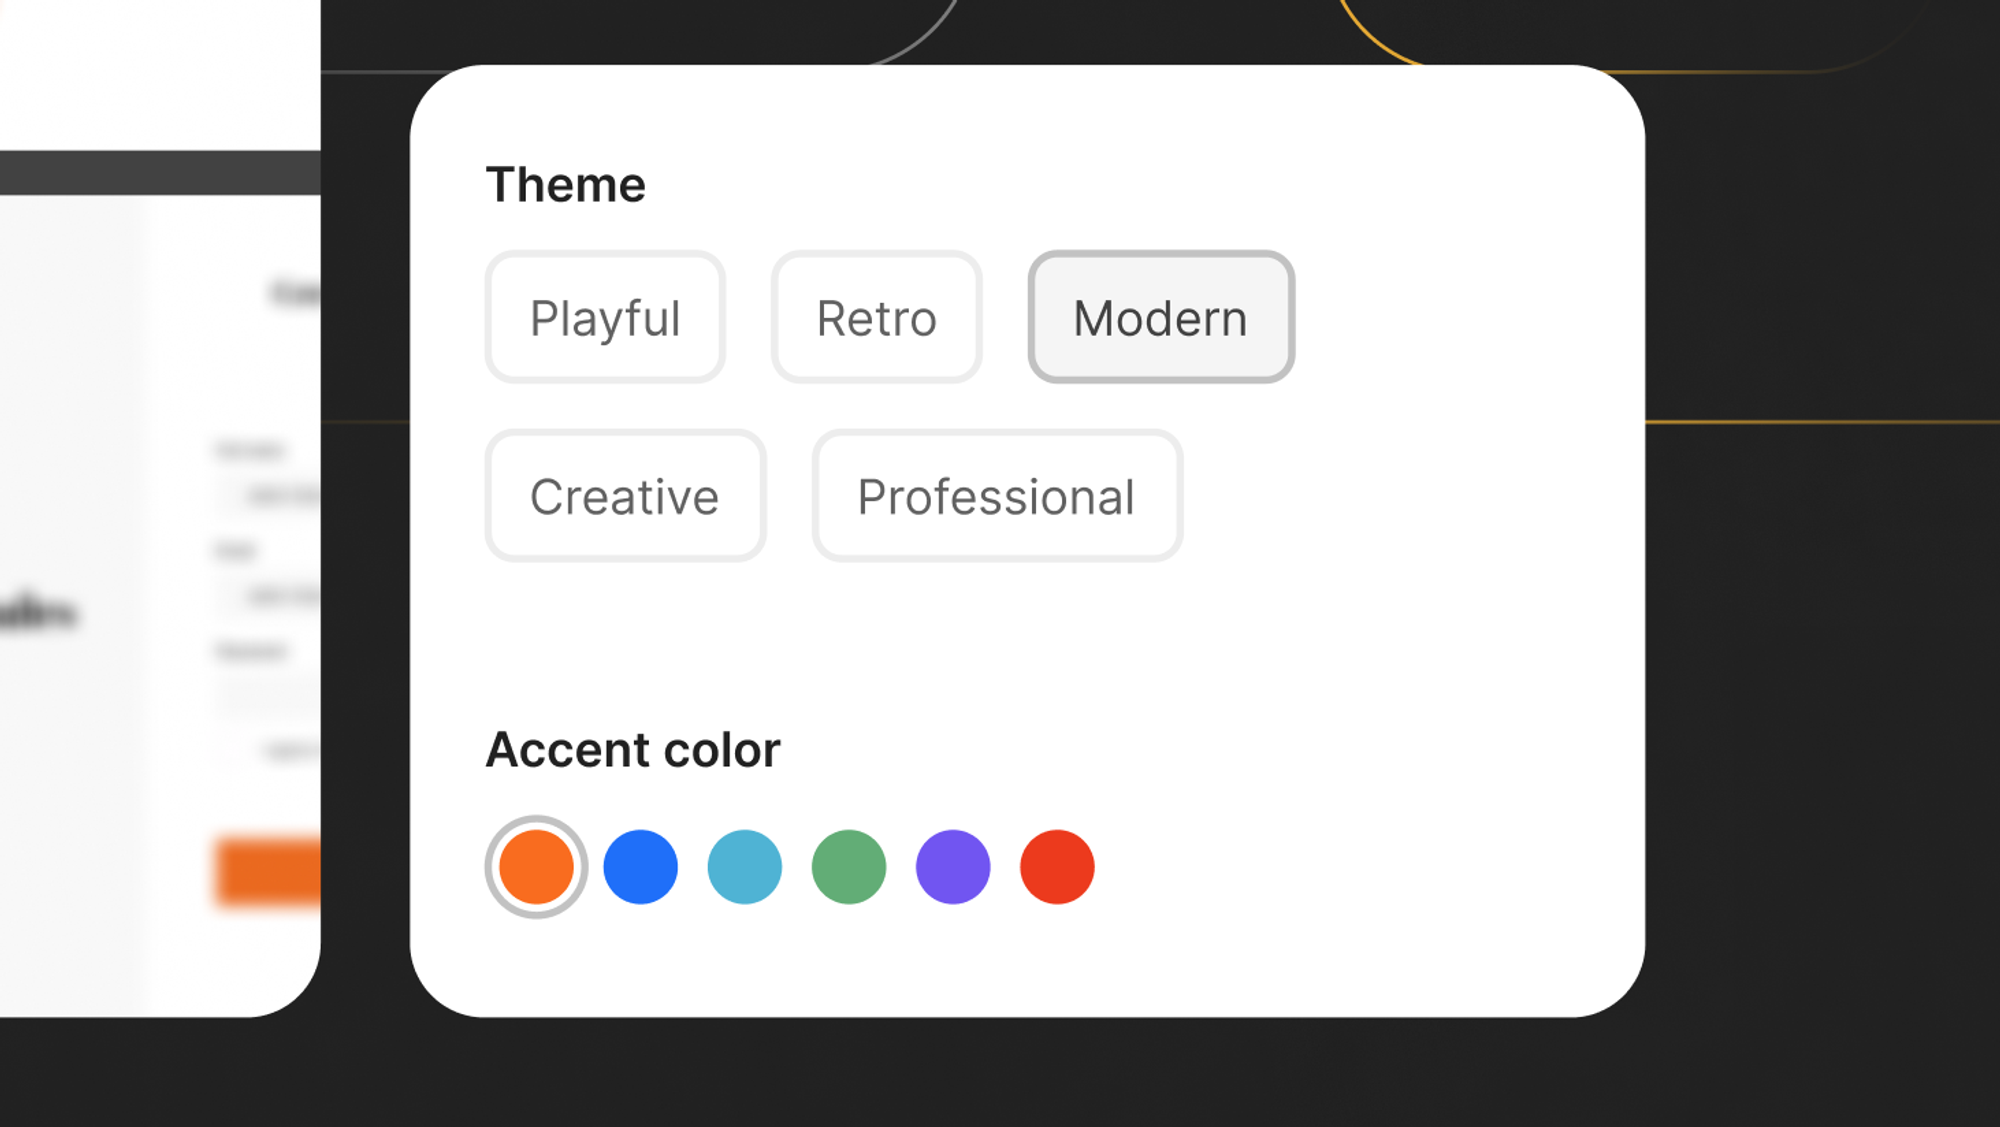 Select a theme and accent color